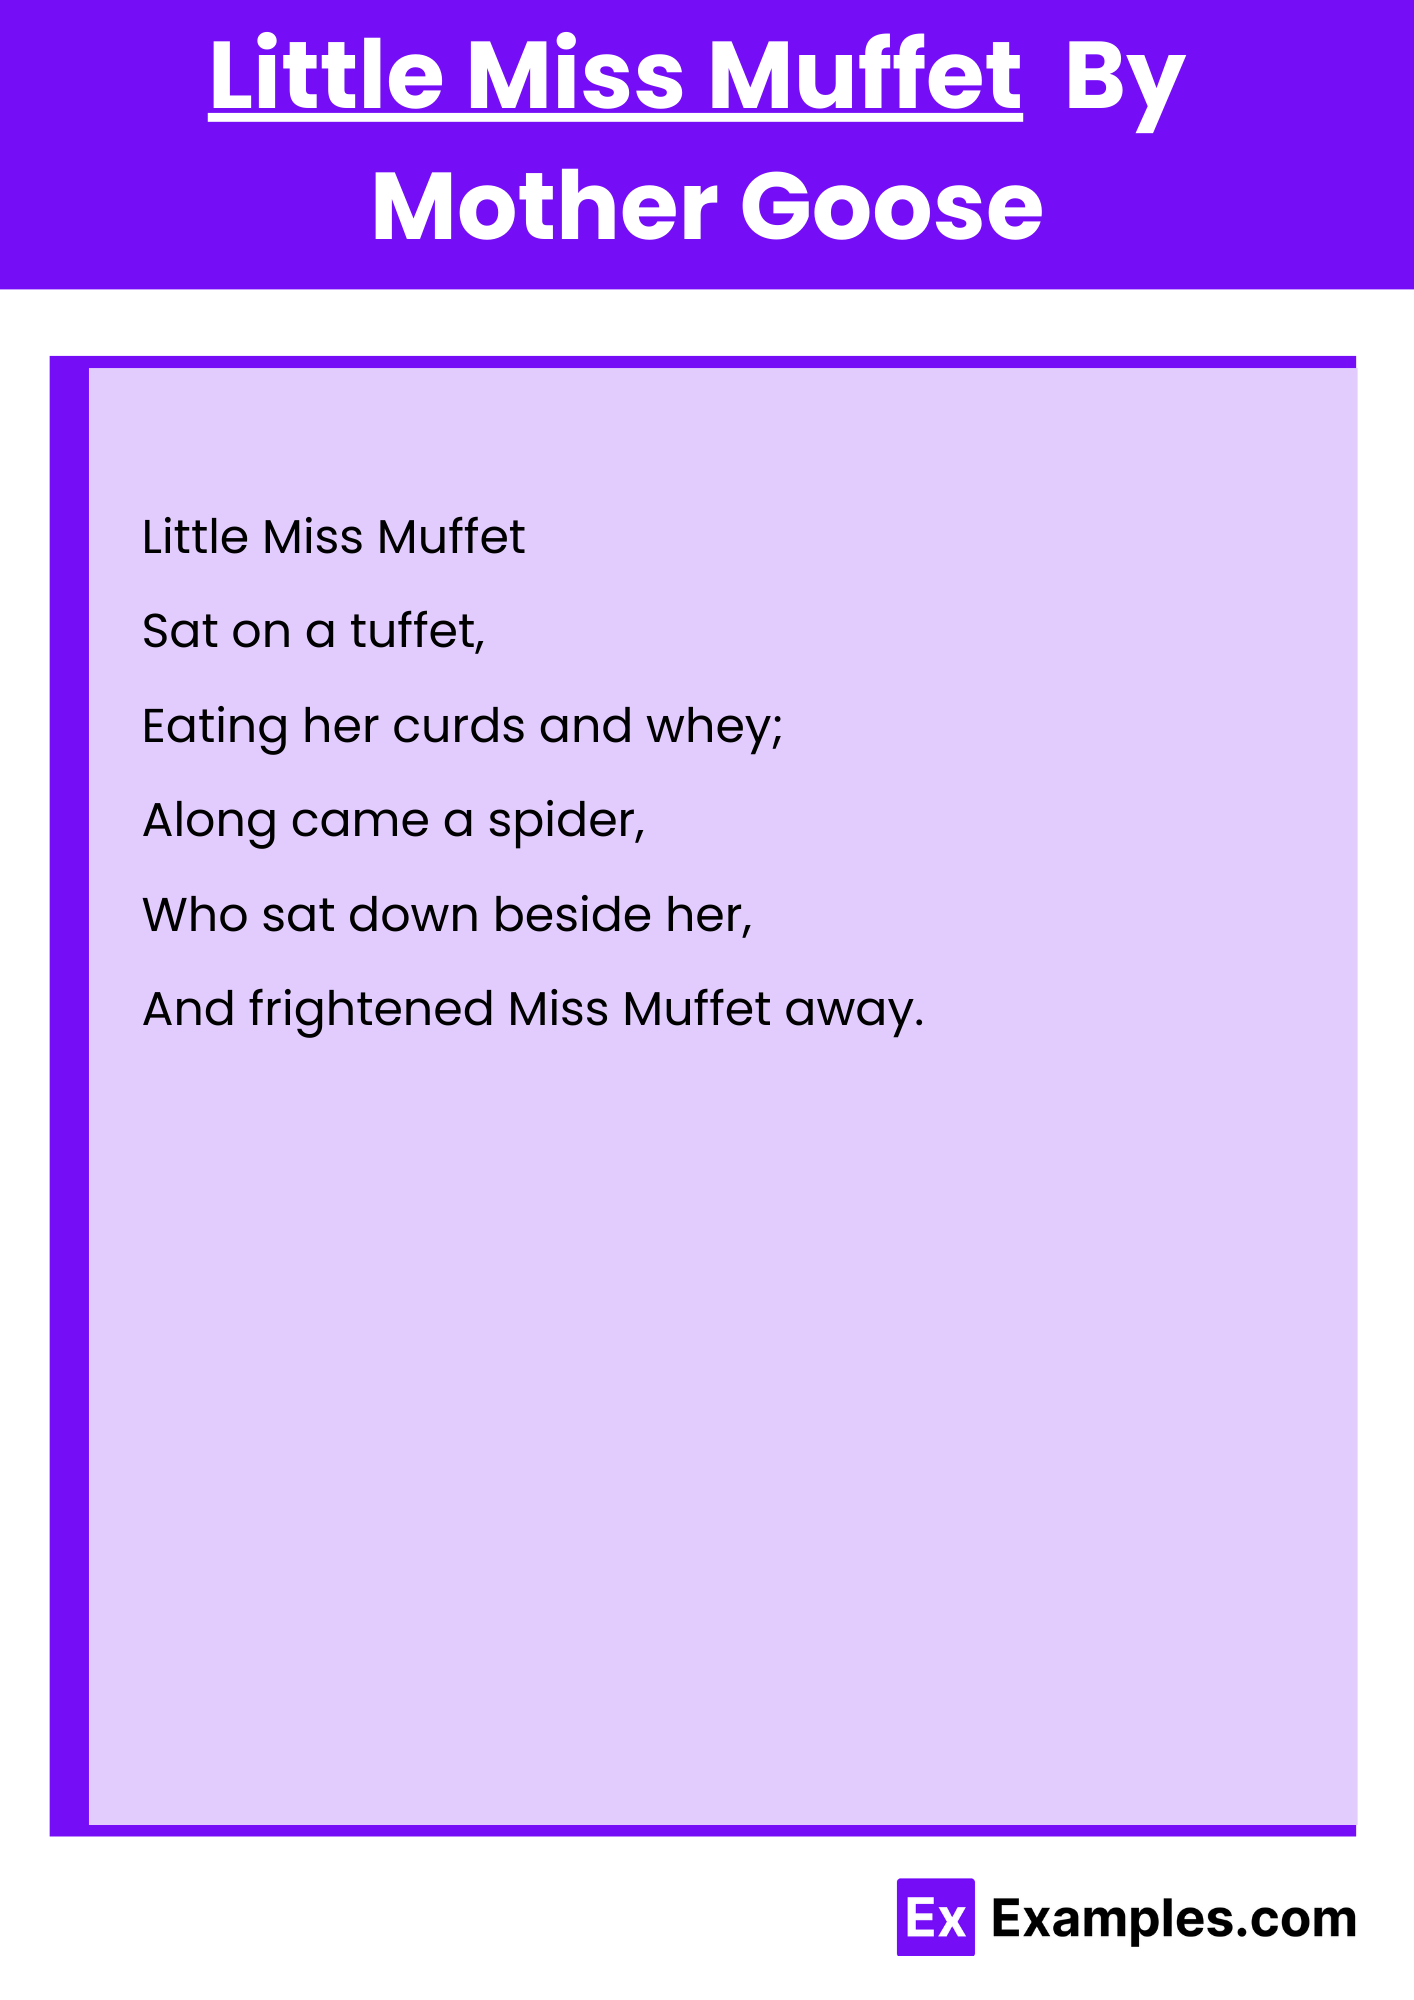 Little Miss Muffet By Mother Goose